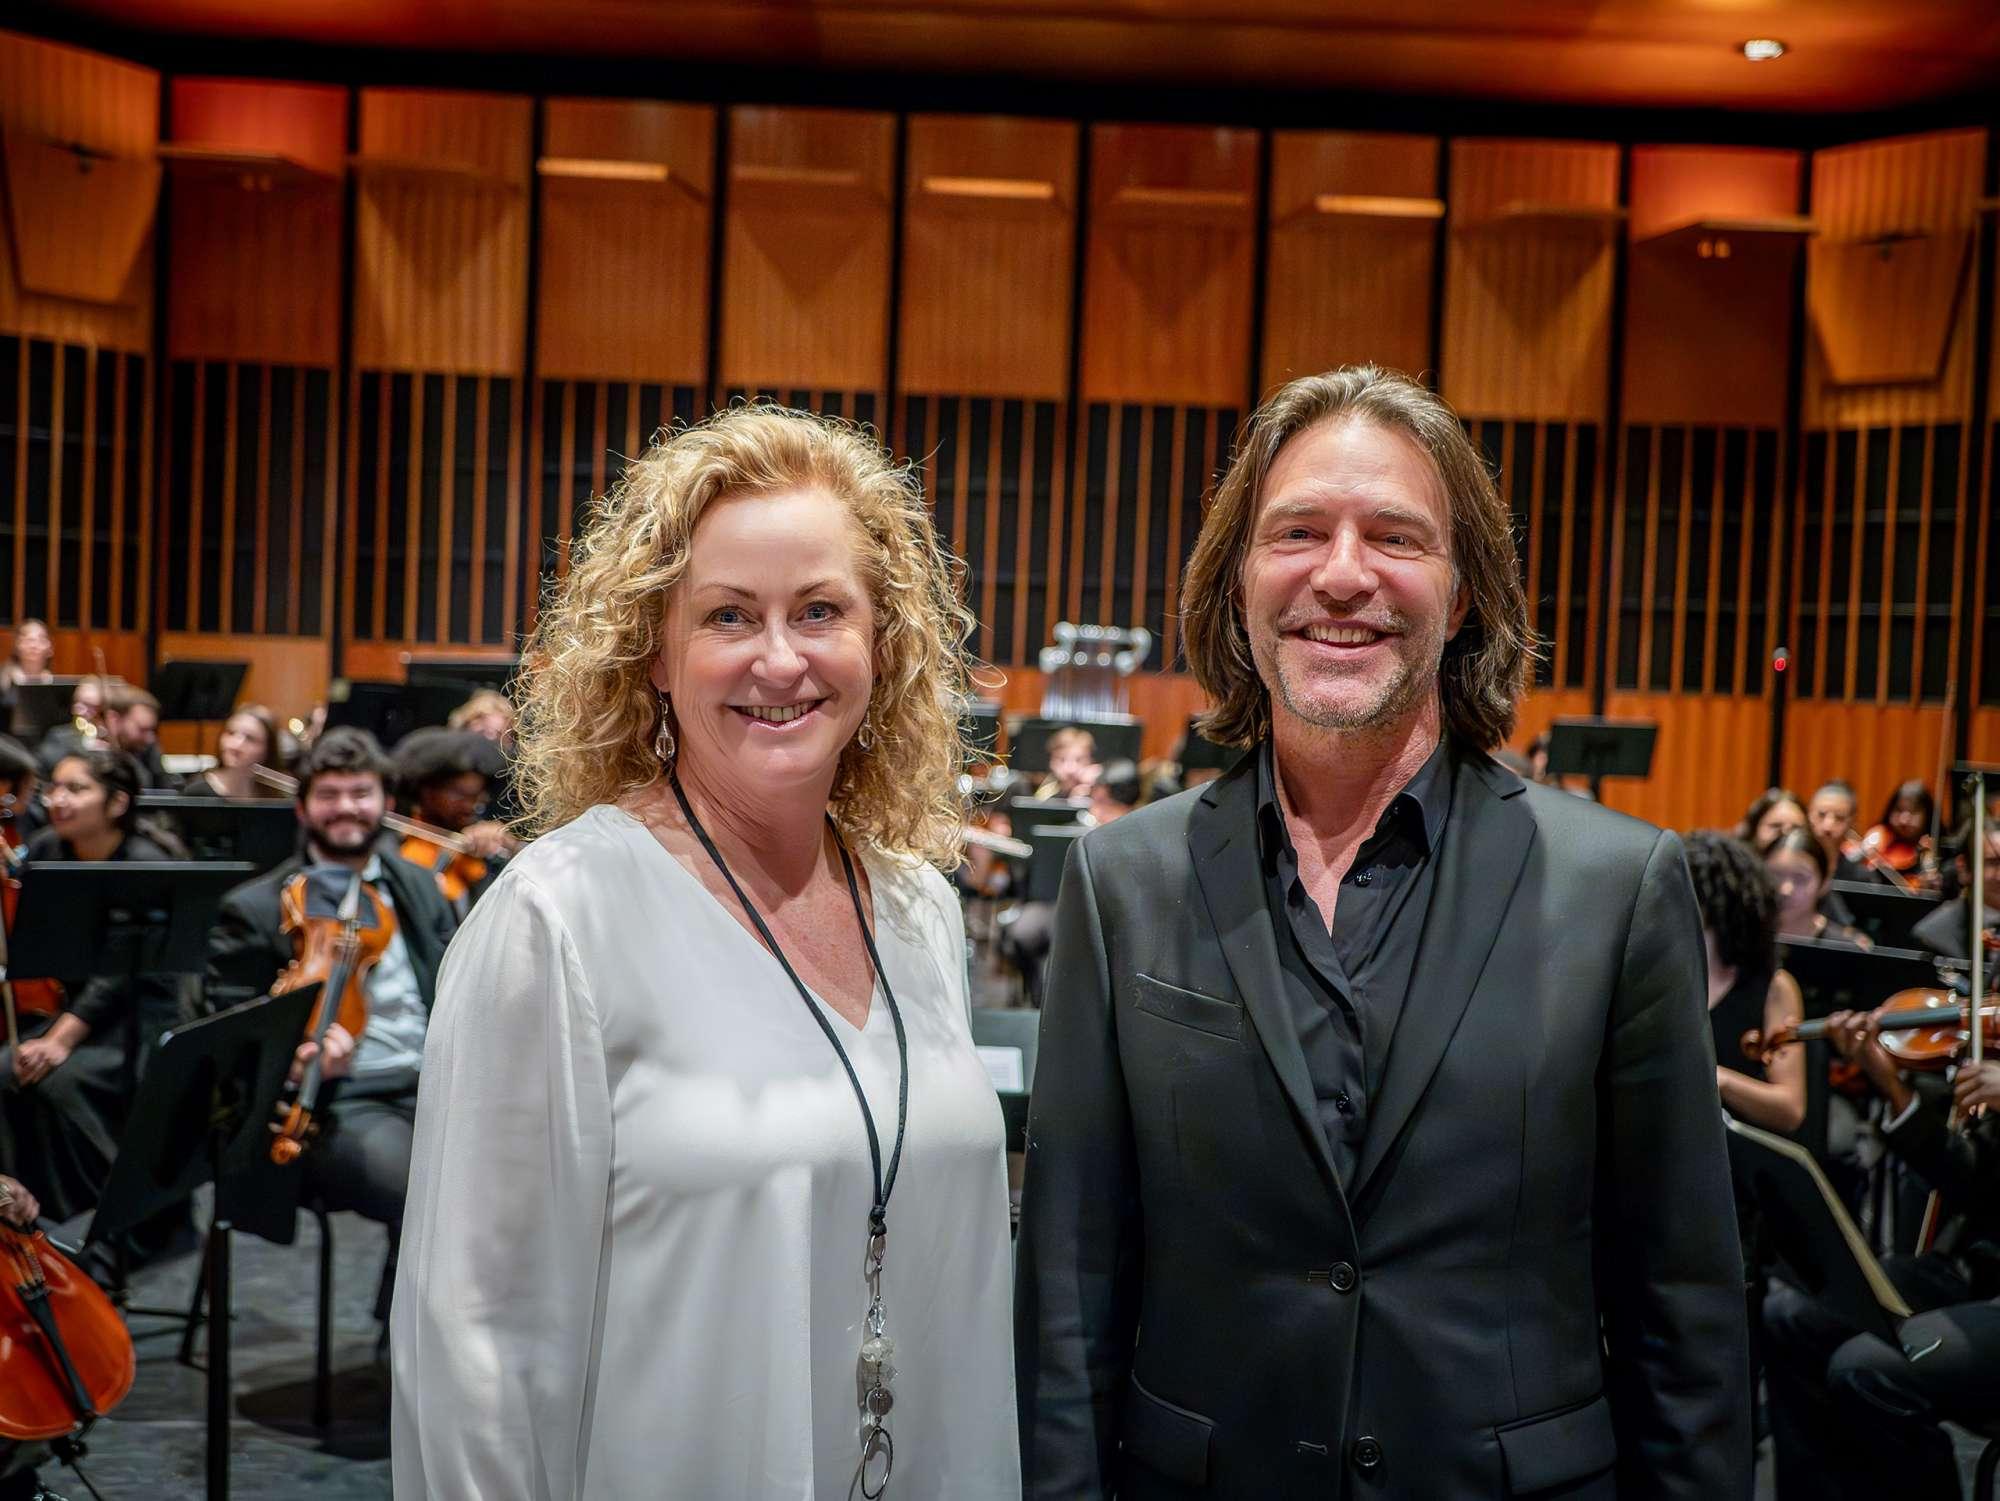 Eric Whittacre and Heather J. Buchanan